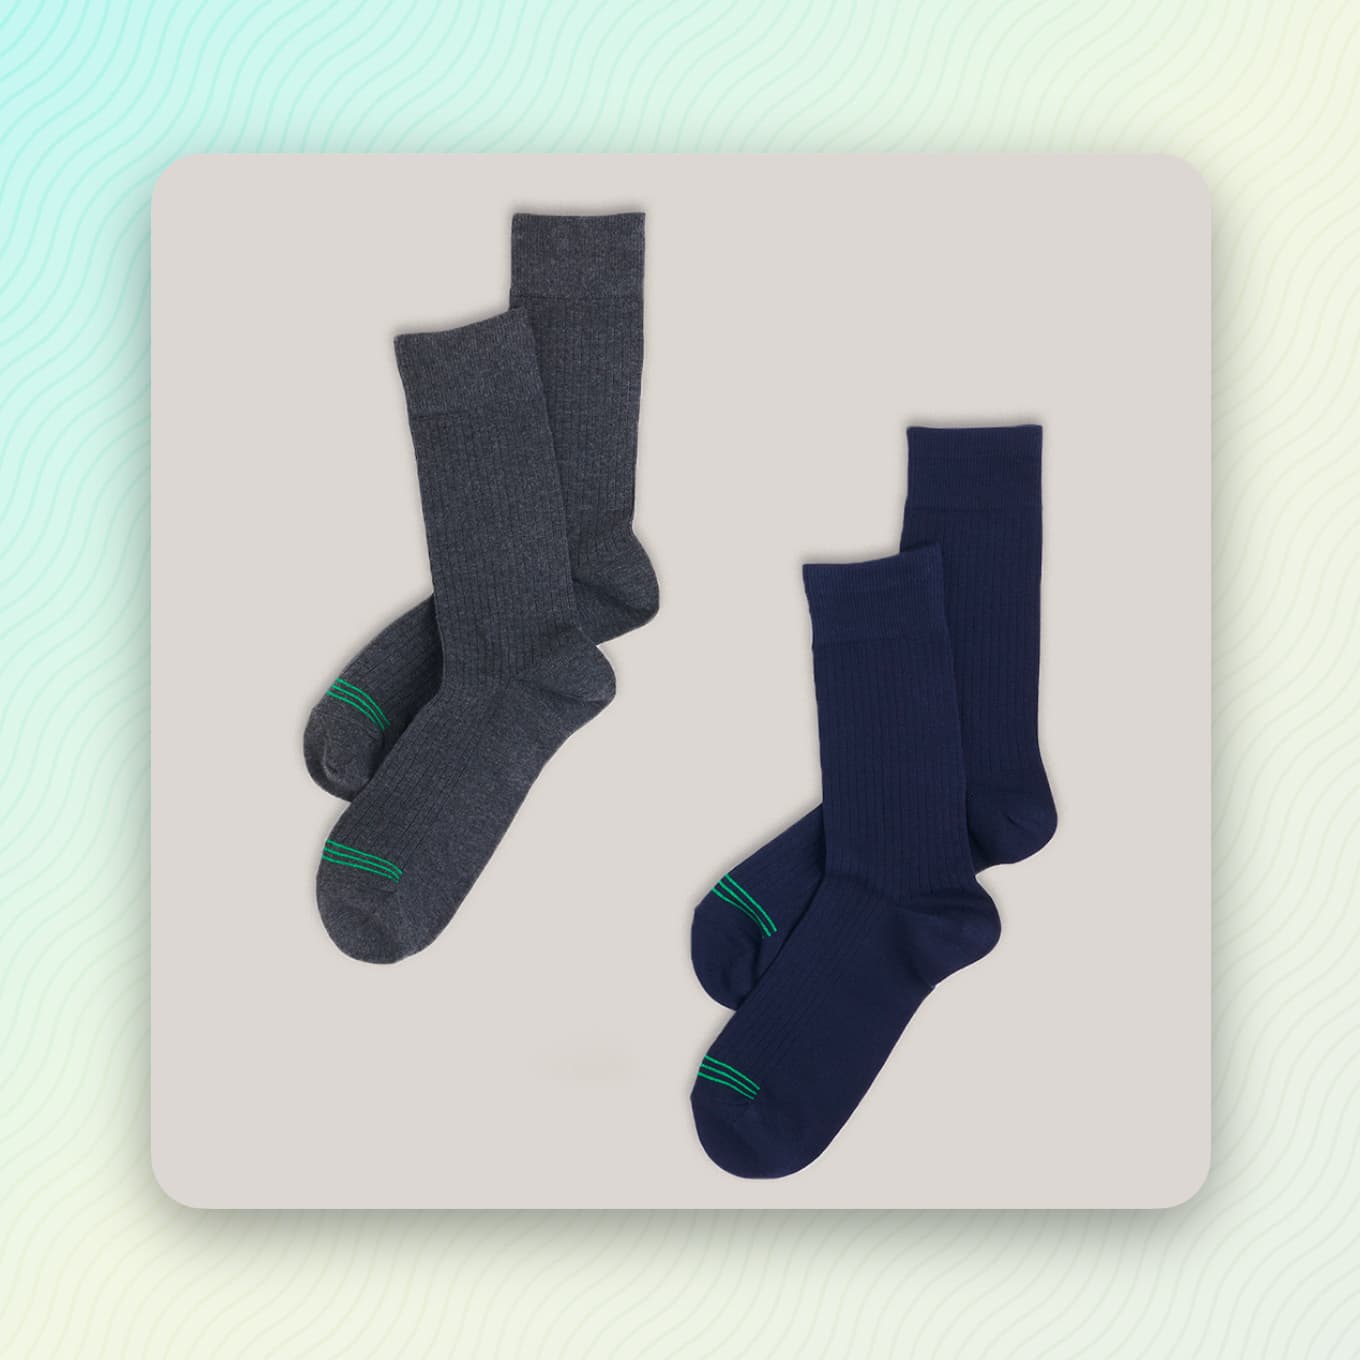 Simple socks with green lines from Pact